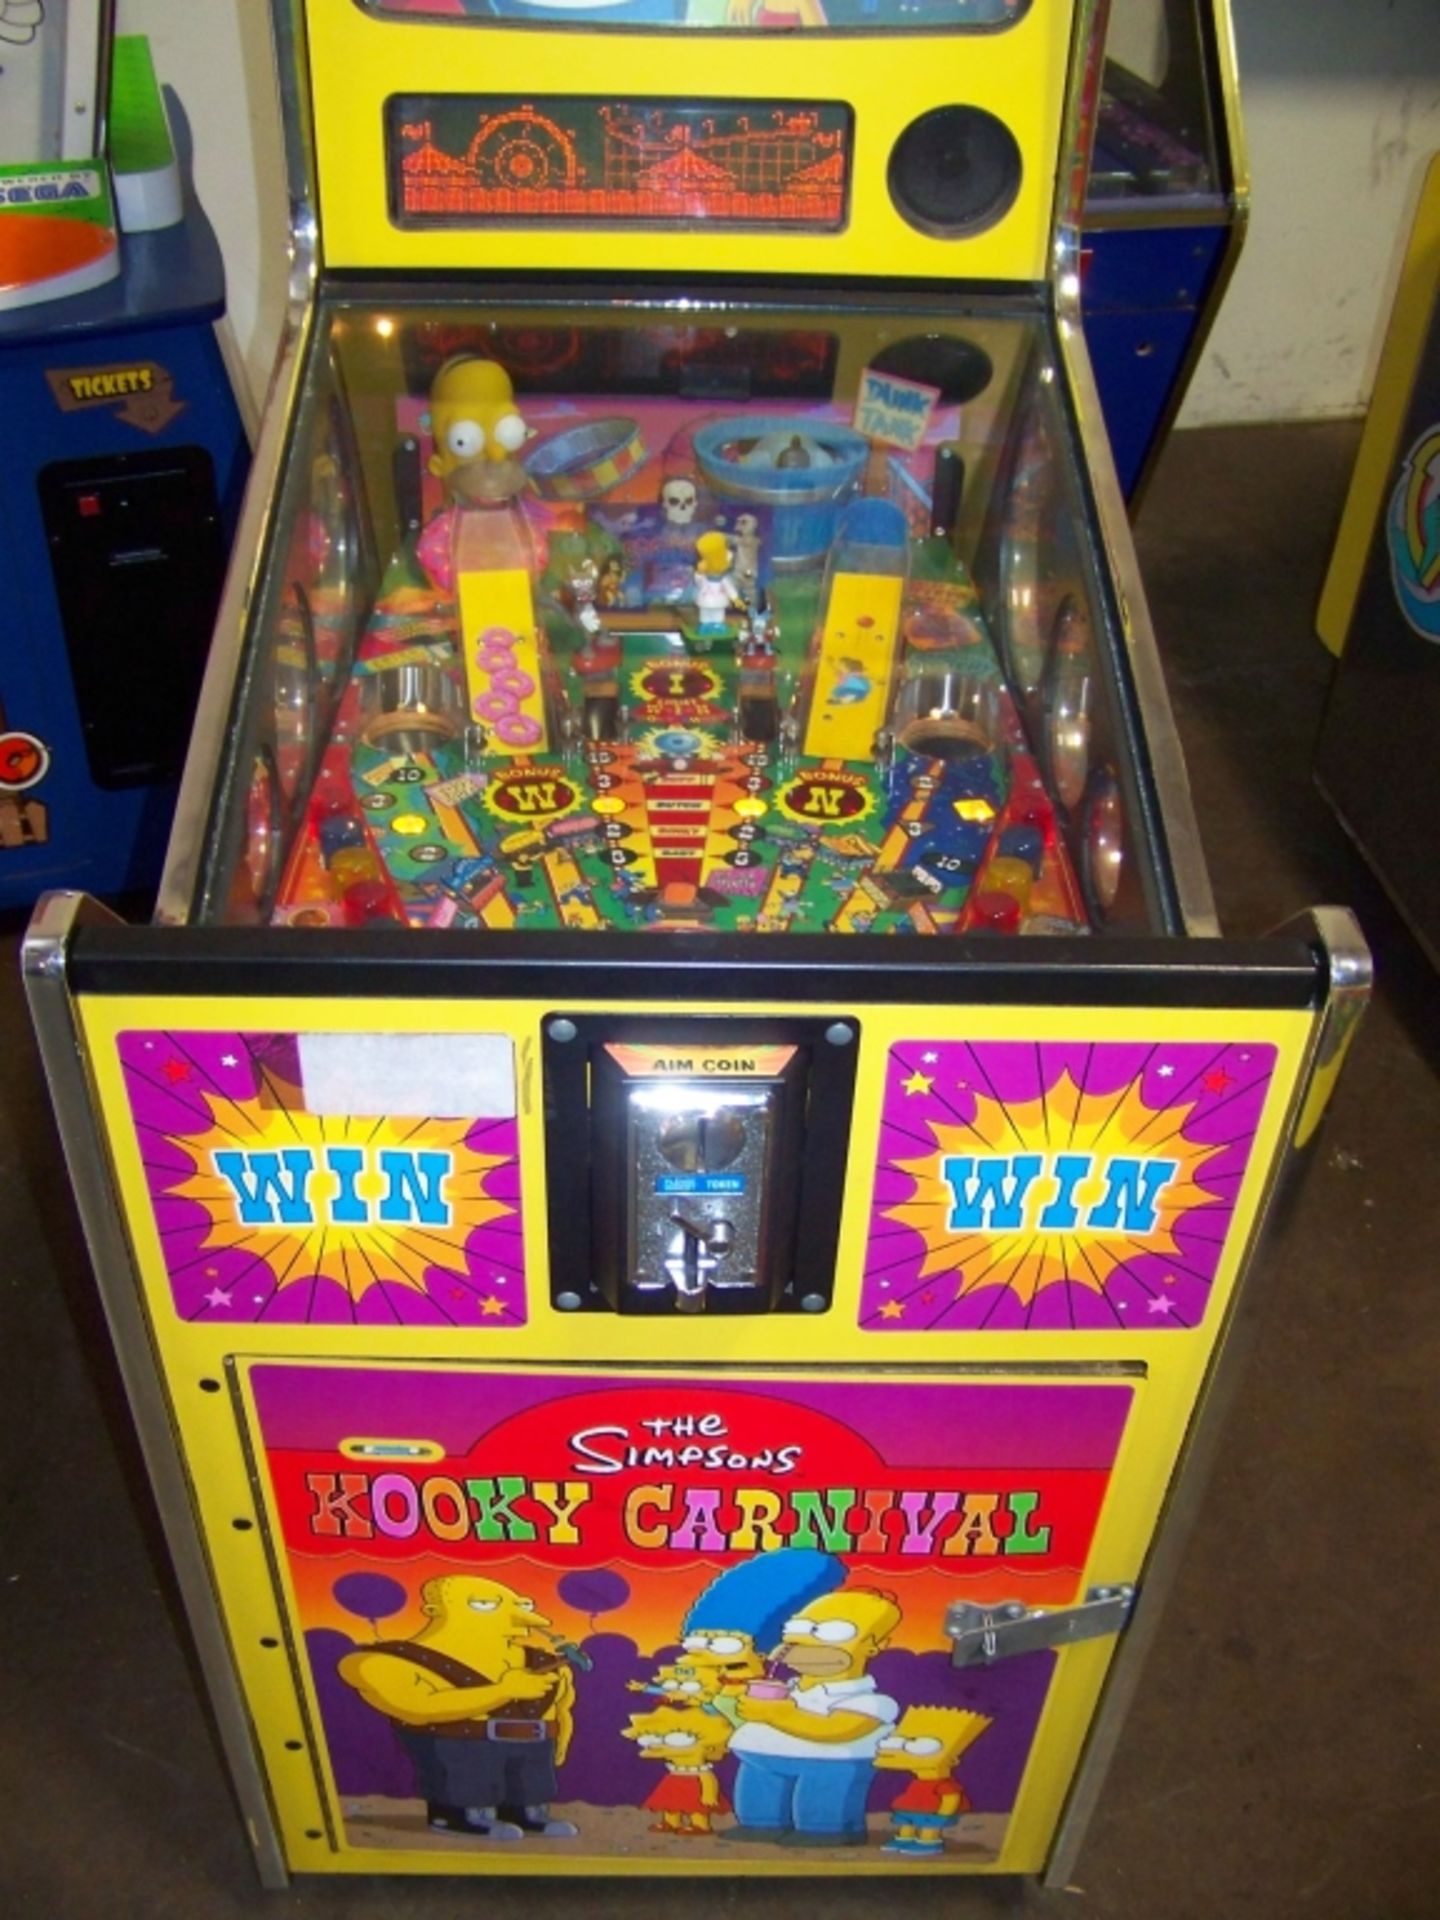 THE SIMPSONS KOOKY CARNIVAL TICKET REDEMPTION GAME - Image 4 of 5